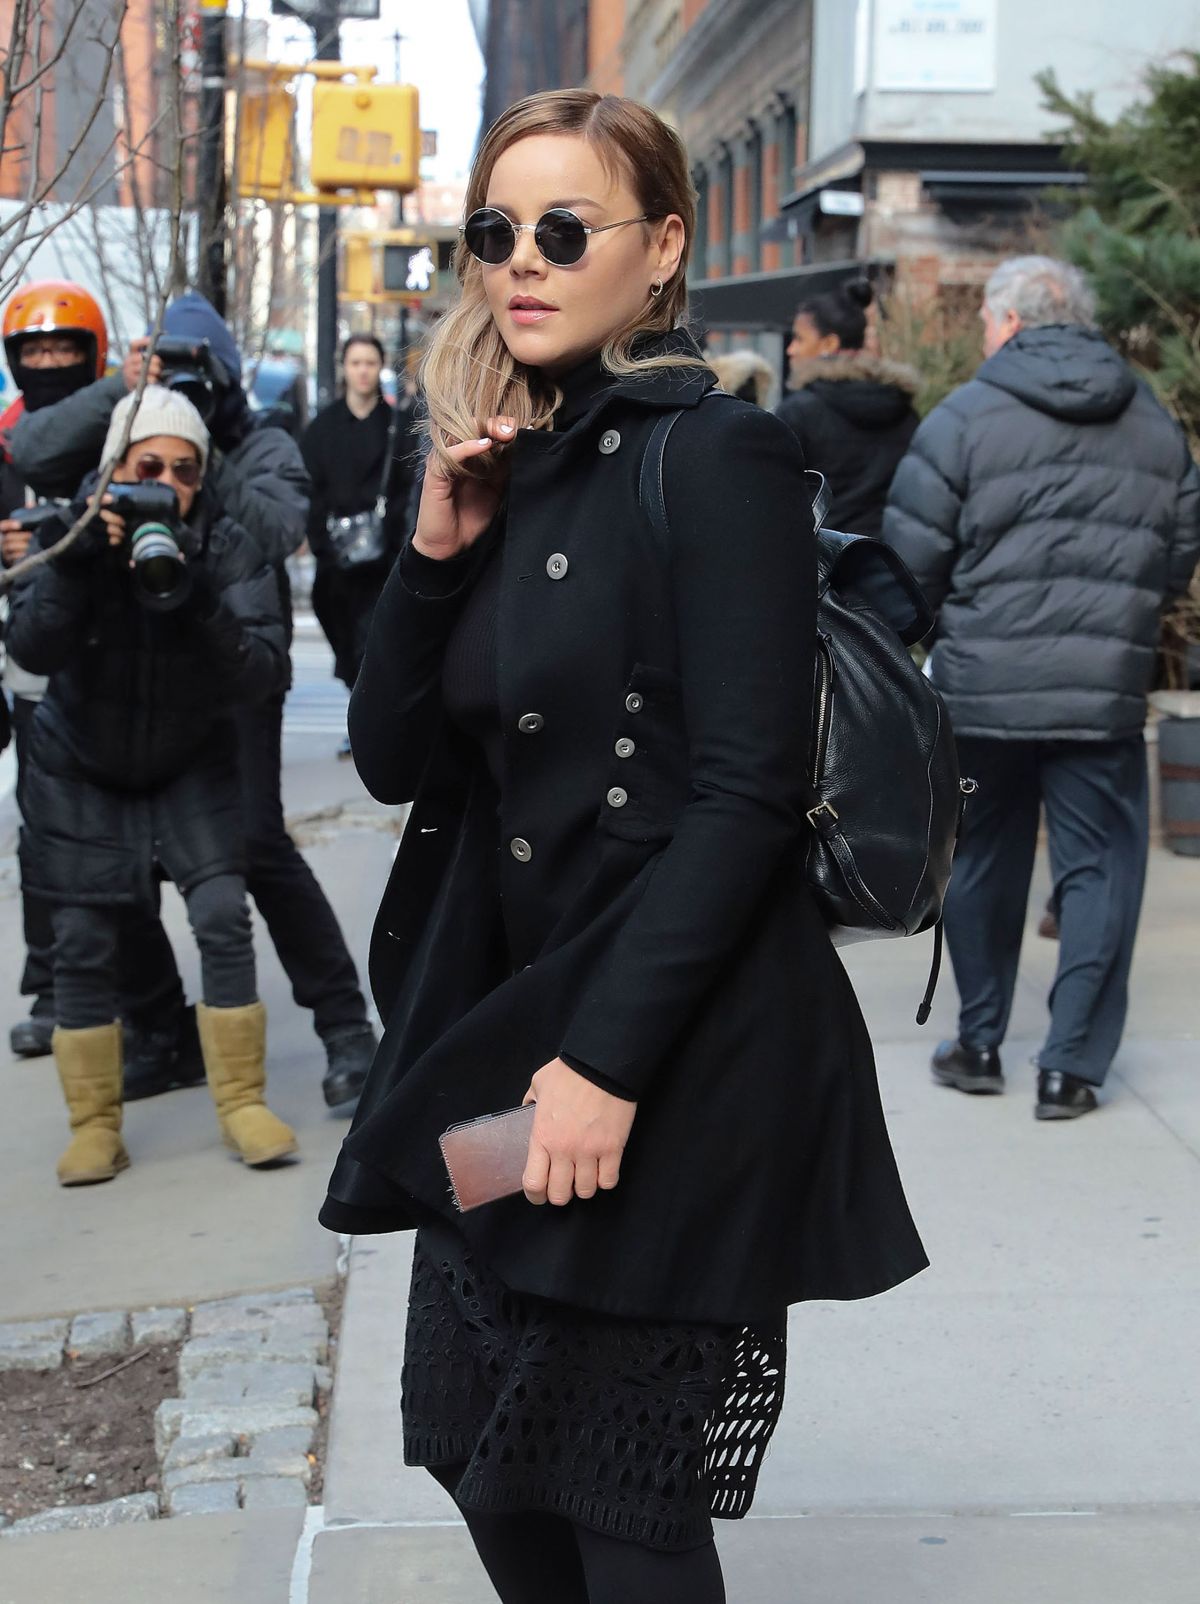 ABBIE CORNISH Out in New York 02/02/2017 – HawtCelebs